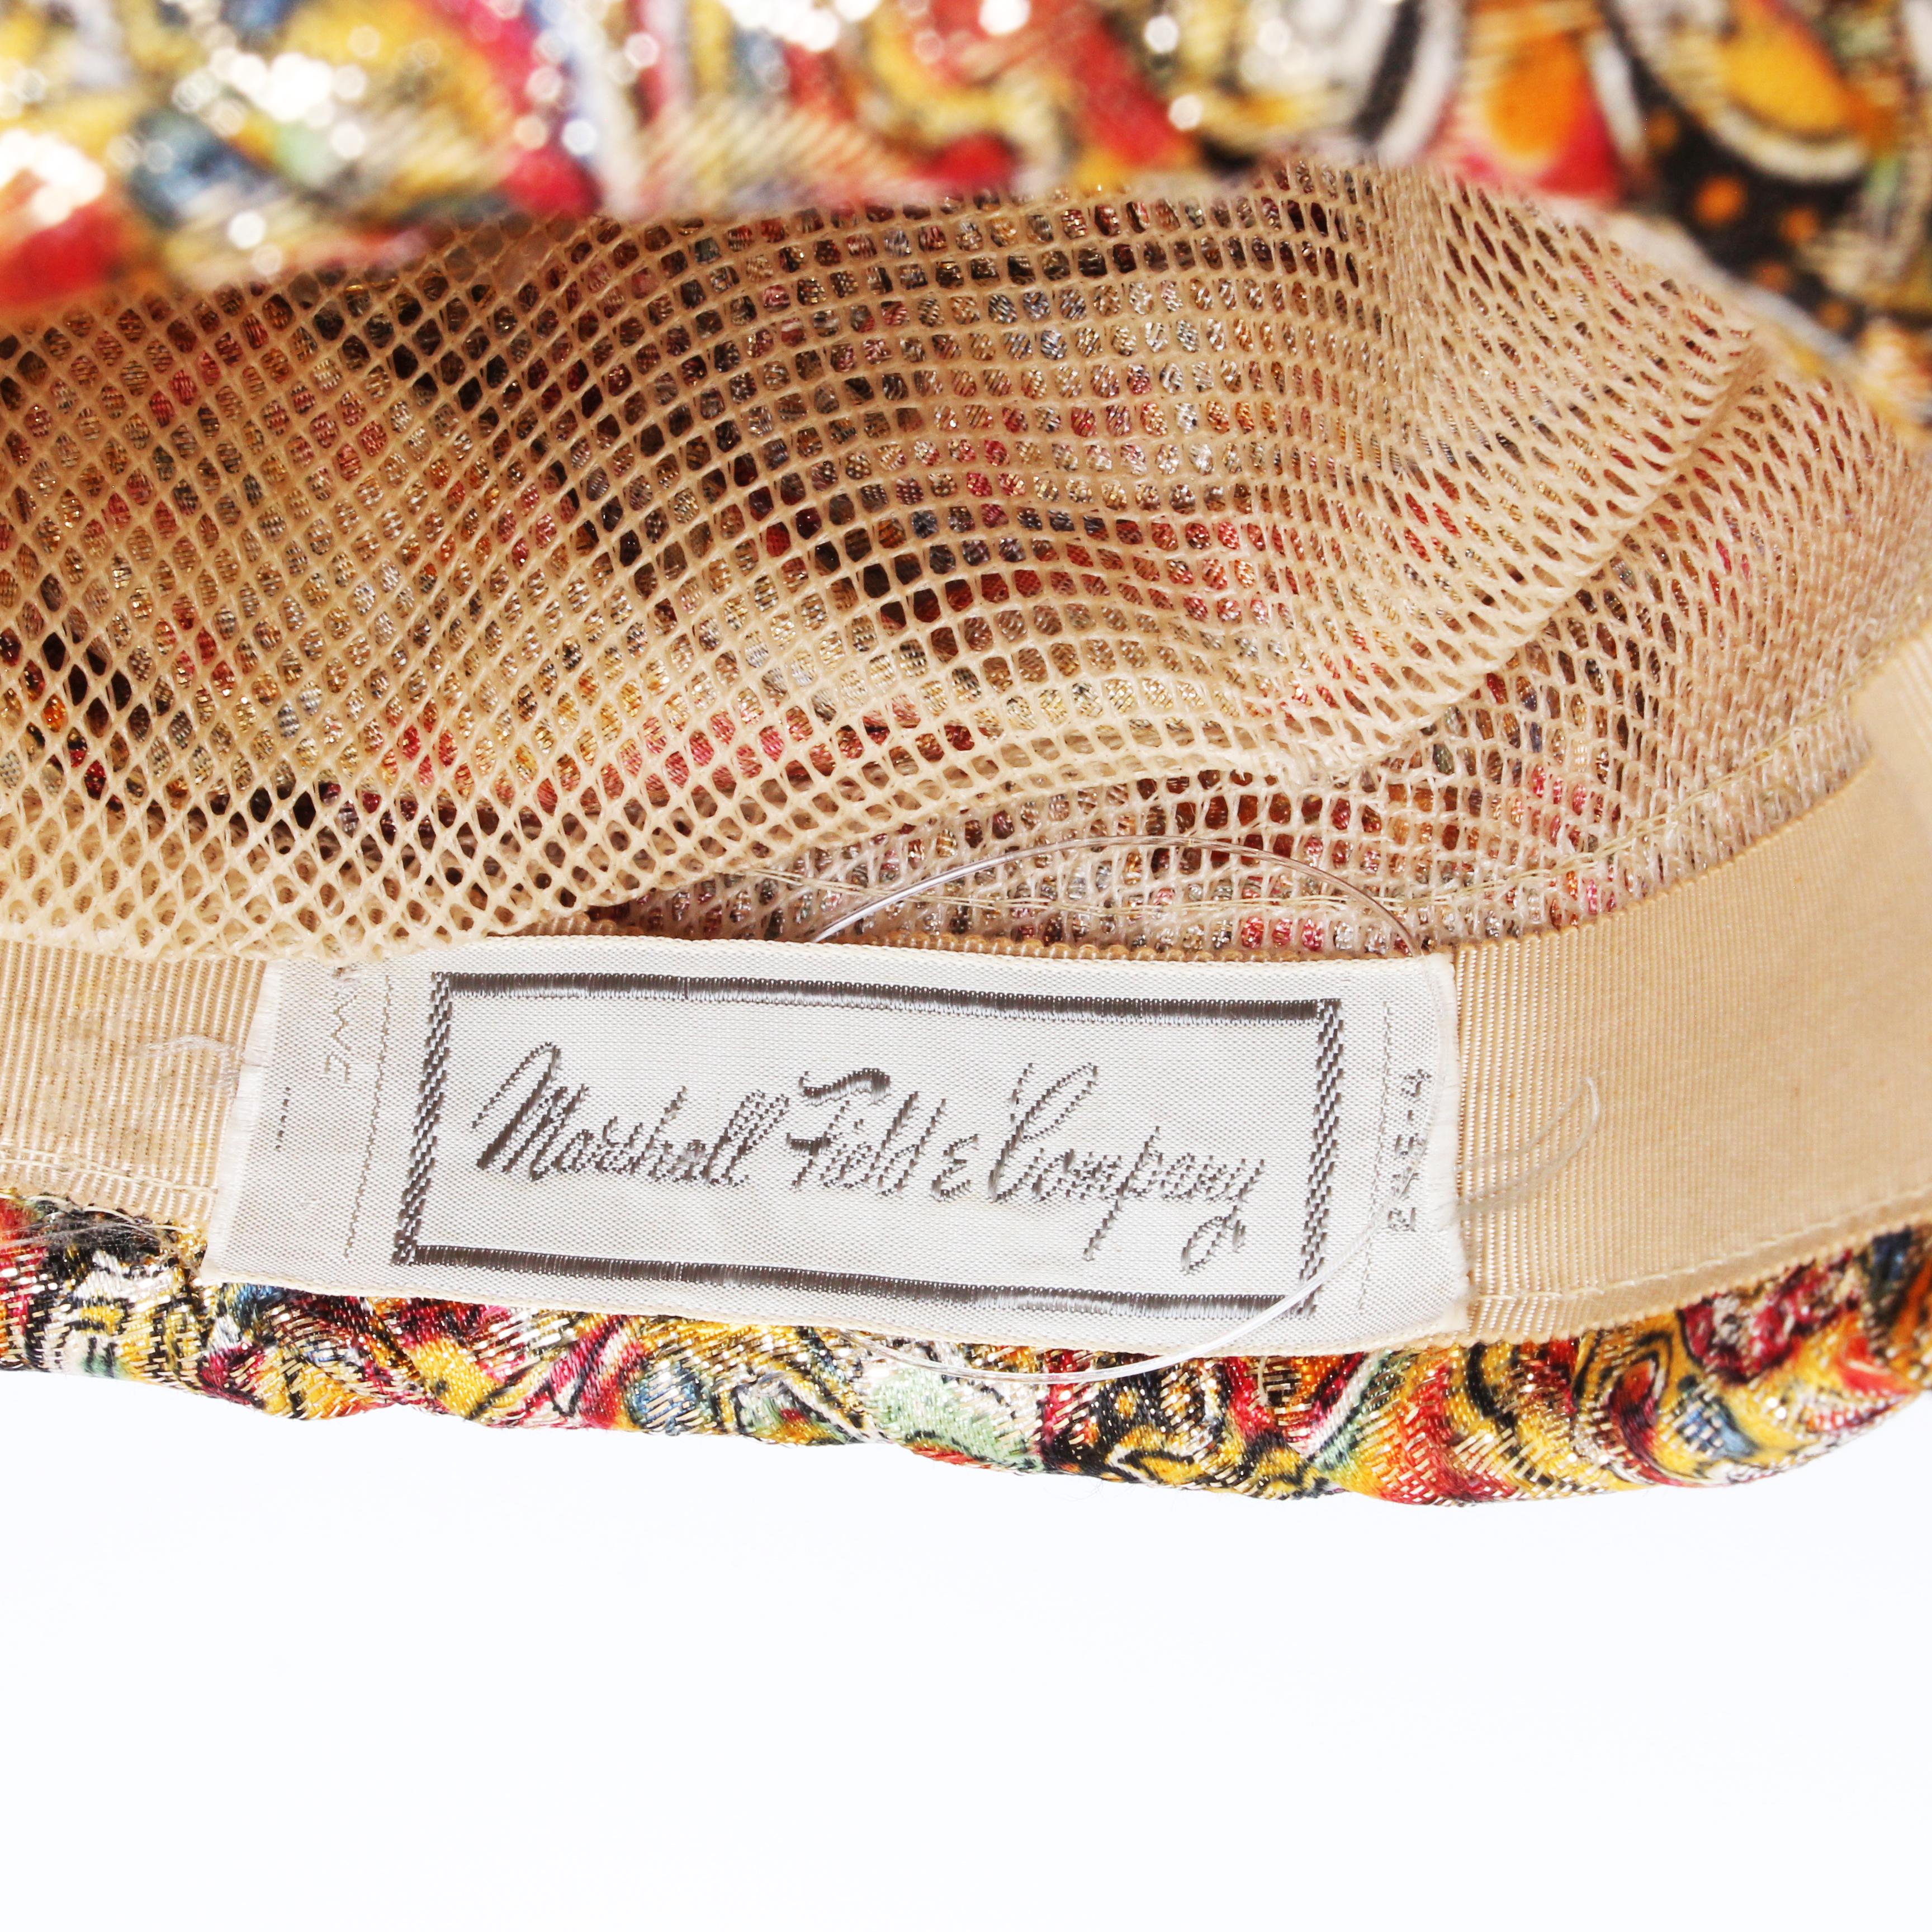 1950s Turban Hat Metallic Paisley Colorful by Marshall Field & Company Rare  For Sale 8